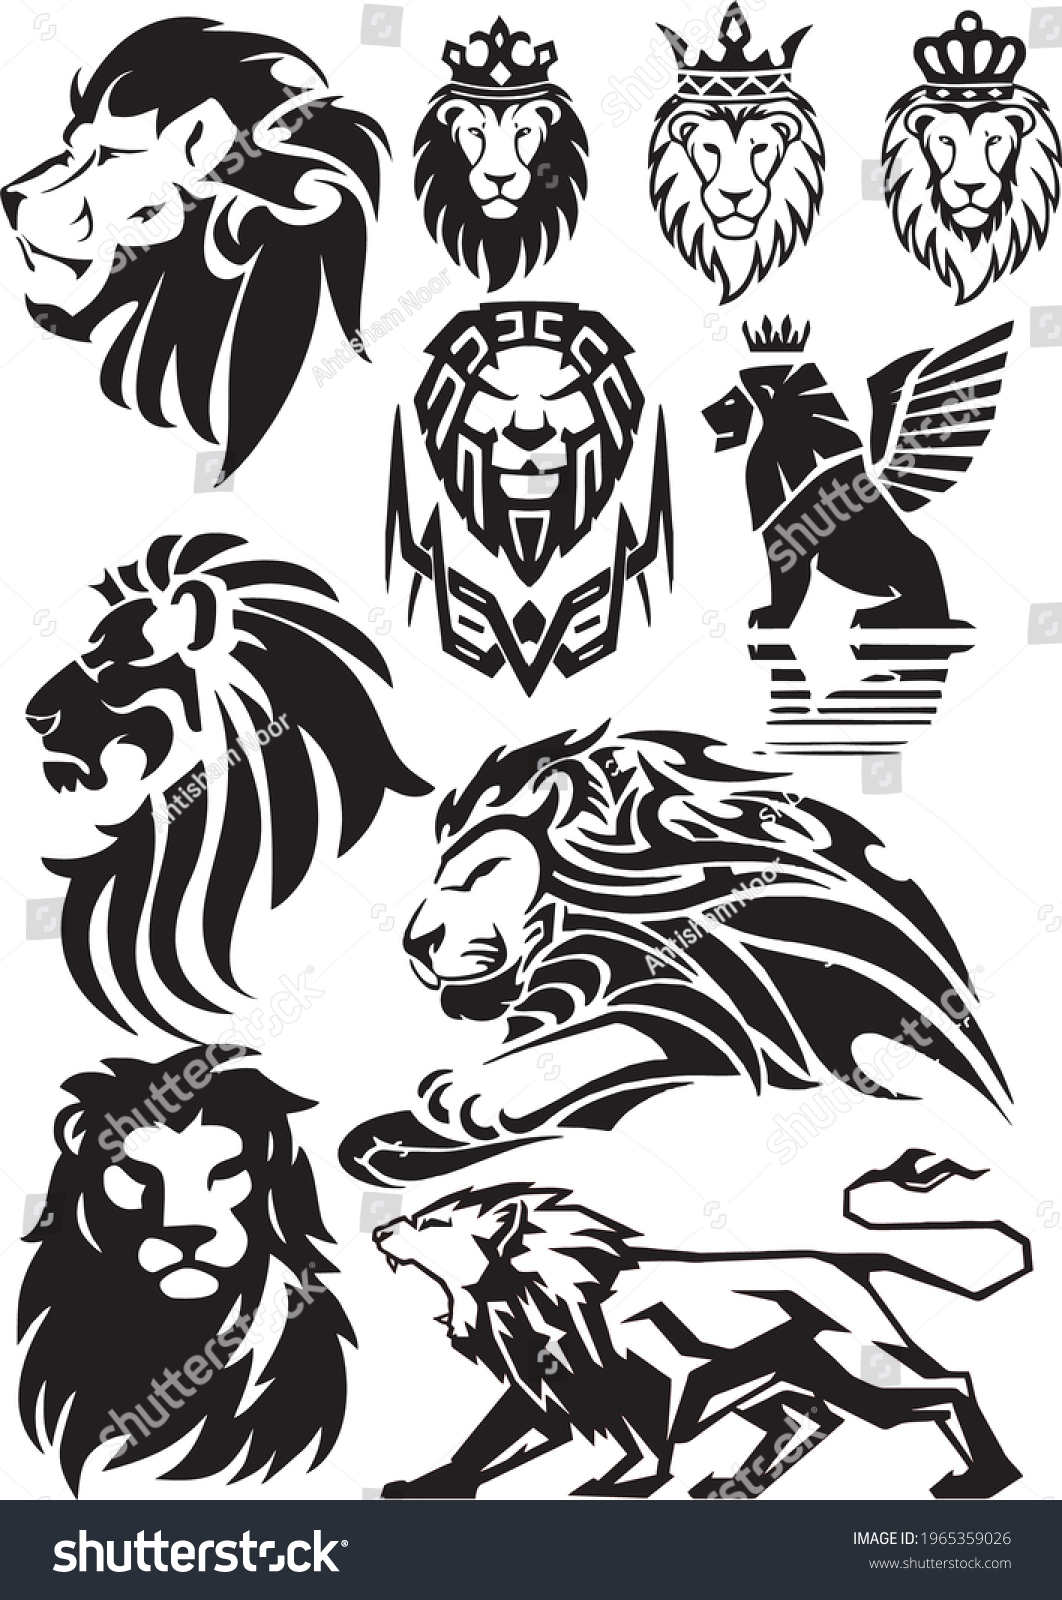 Lion Vector File Designs Lions Stock Vector (Royalty Free) 1965359026 ...